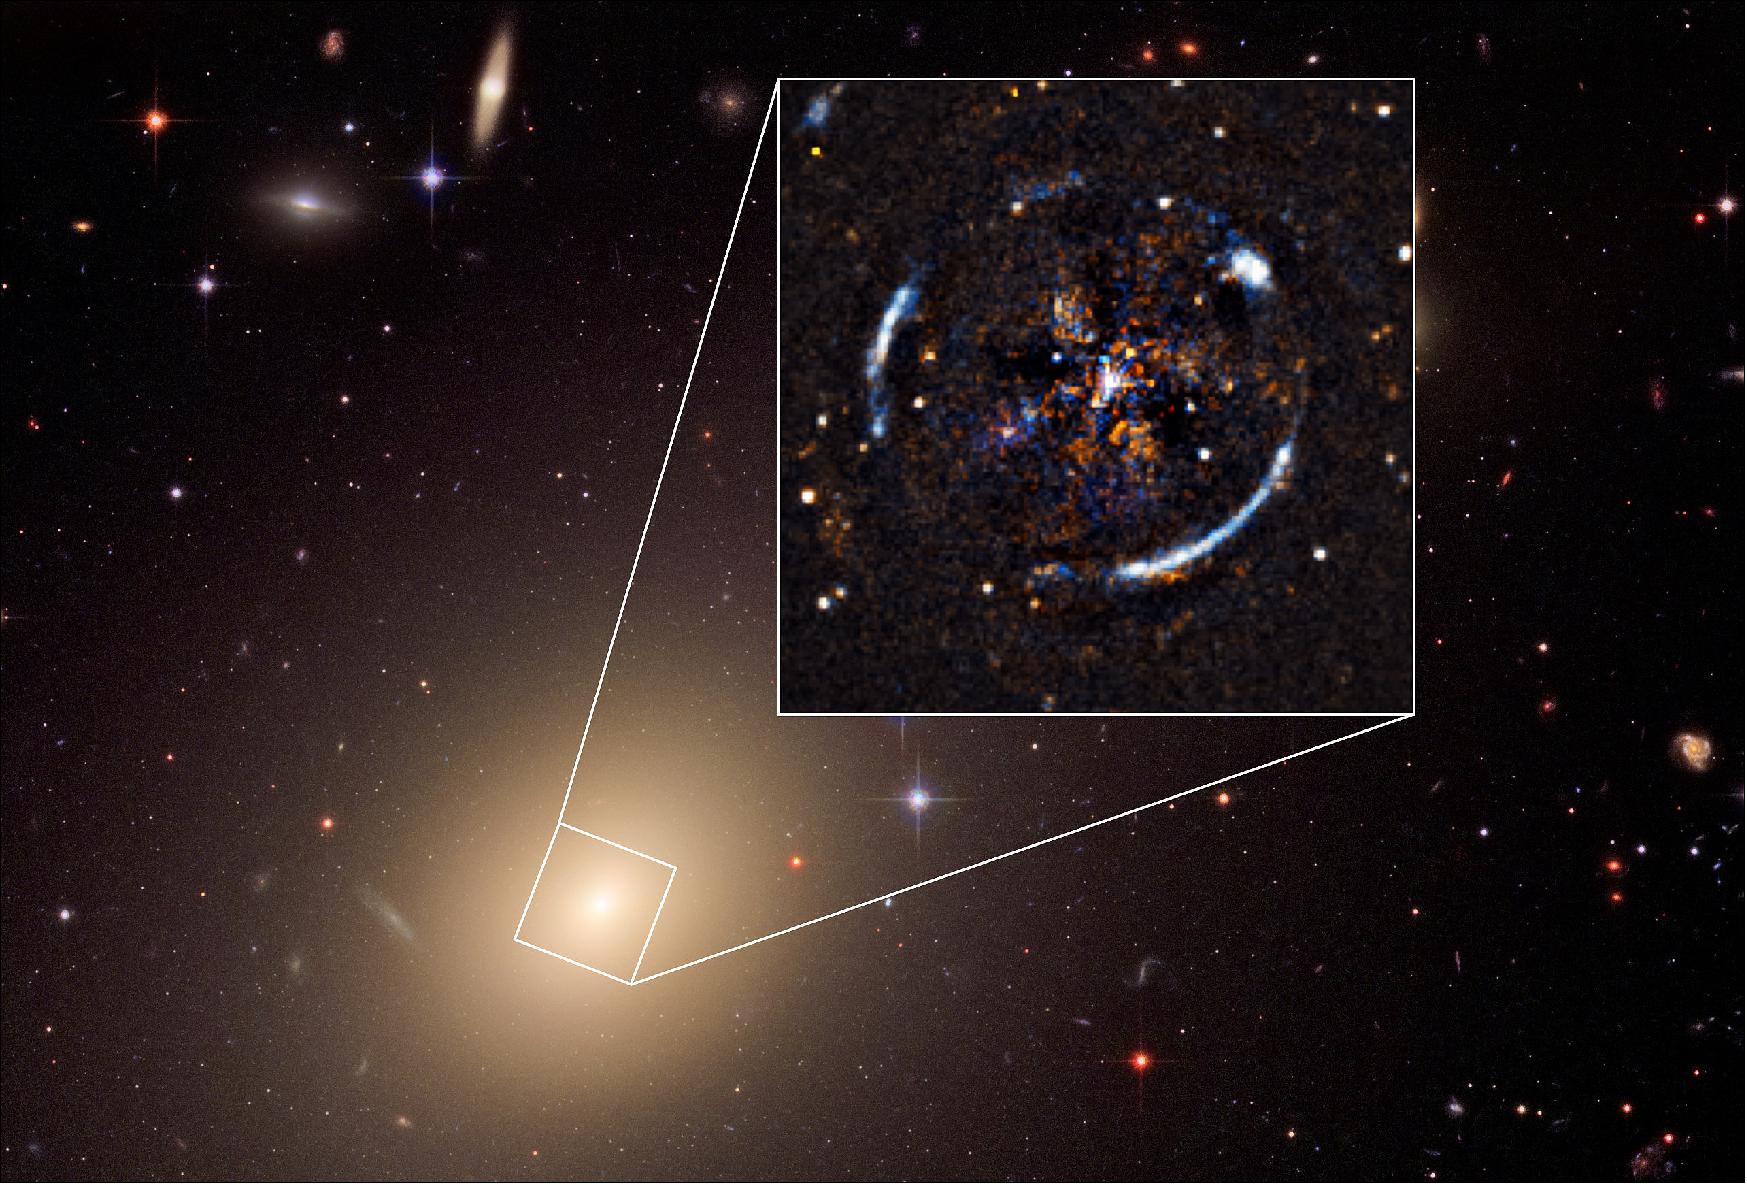 Figure 33: An image of the nearby galaxy ESO 325-G004, created using data collected by the NASA/ESA Hubble Space Telescope and the MUSE instrument on the ESO's Very Large Telescope. MUSE measured the velocity of stars in ESO 325-G004 to produce the velocity dispersion map that is overlaid on top of the Hubble Space Telescope image. Knowledge of the velocities of the stars allowed the astronomers to infer the mass of ESO 325-G004. The inset shows the Einstein ring resulting from the distortion of light from a more distant source by intervening lens ESO 325-004, which becomes visible after subtraction of the foreground lens light (image credit: ESO, ESA/Hubble, NASA)